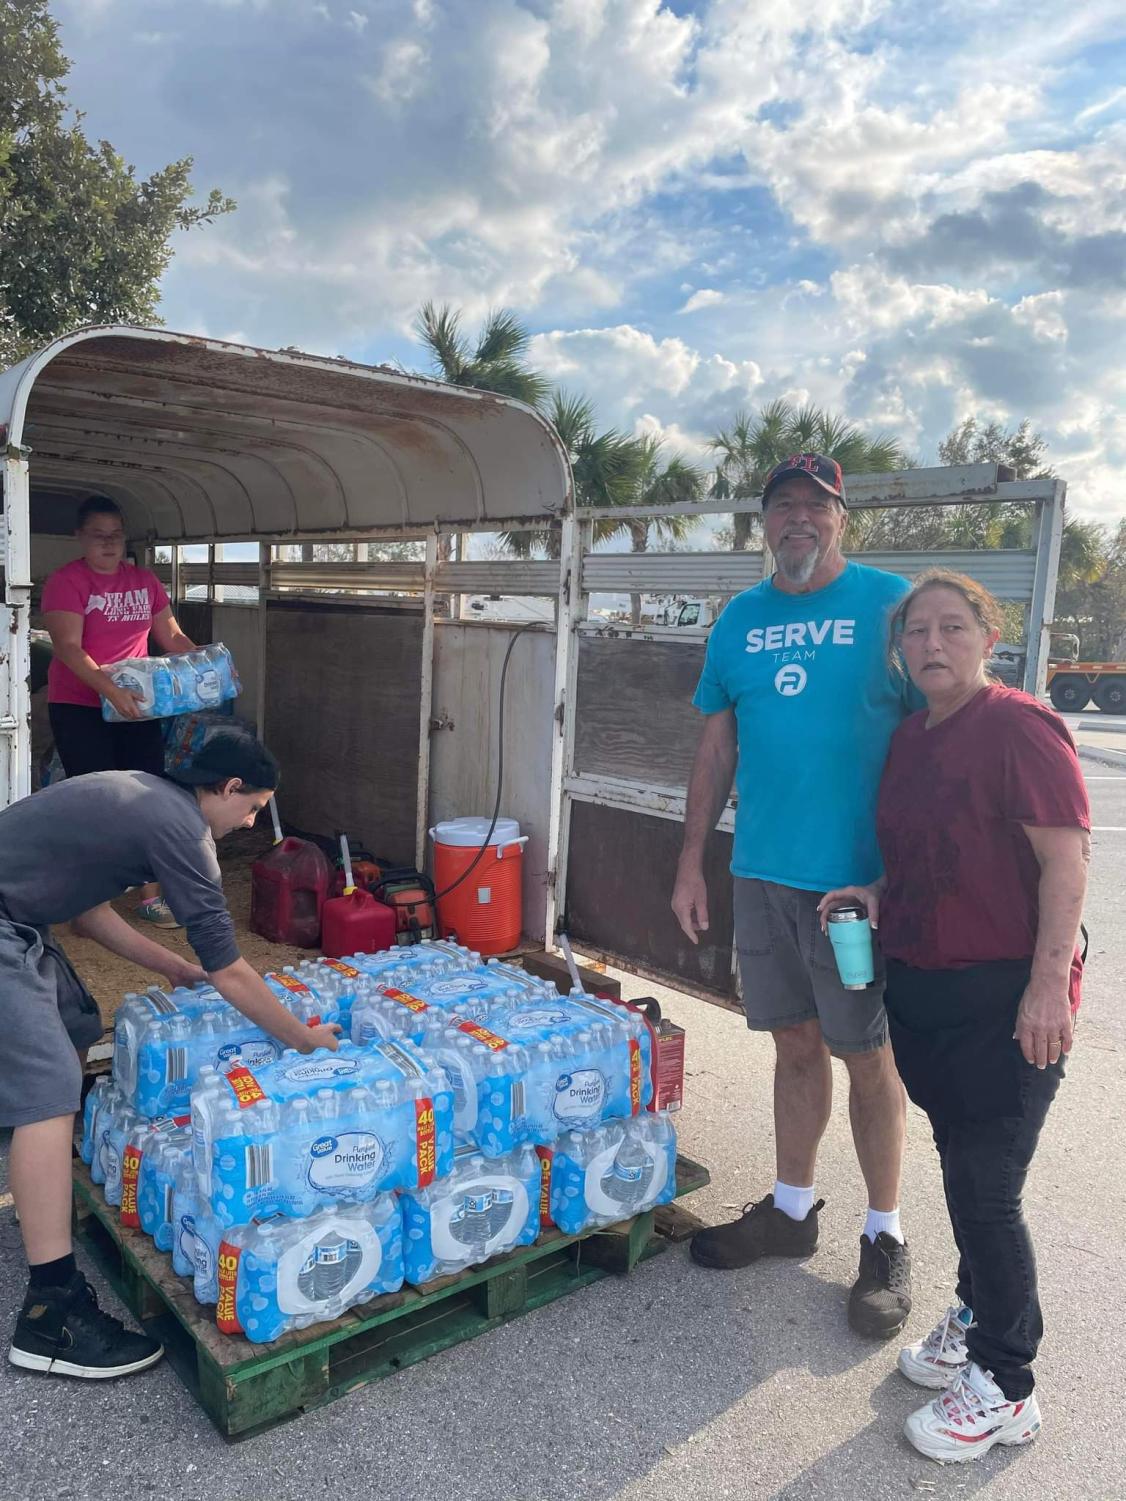 Giving back. Former Altoona resident Ashley Lawter collects donations for affected civilians in Florida, post hurricane Ian. Lawter worked with her husband to raise over $1,200 in donations. 